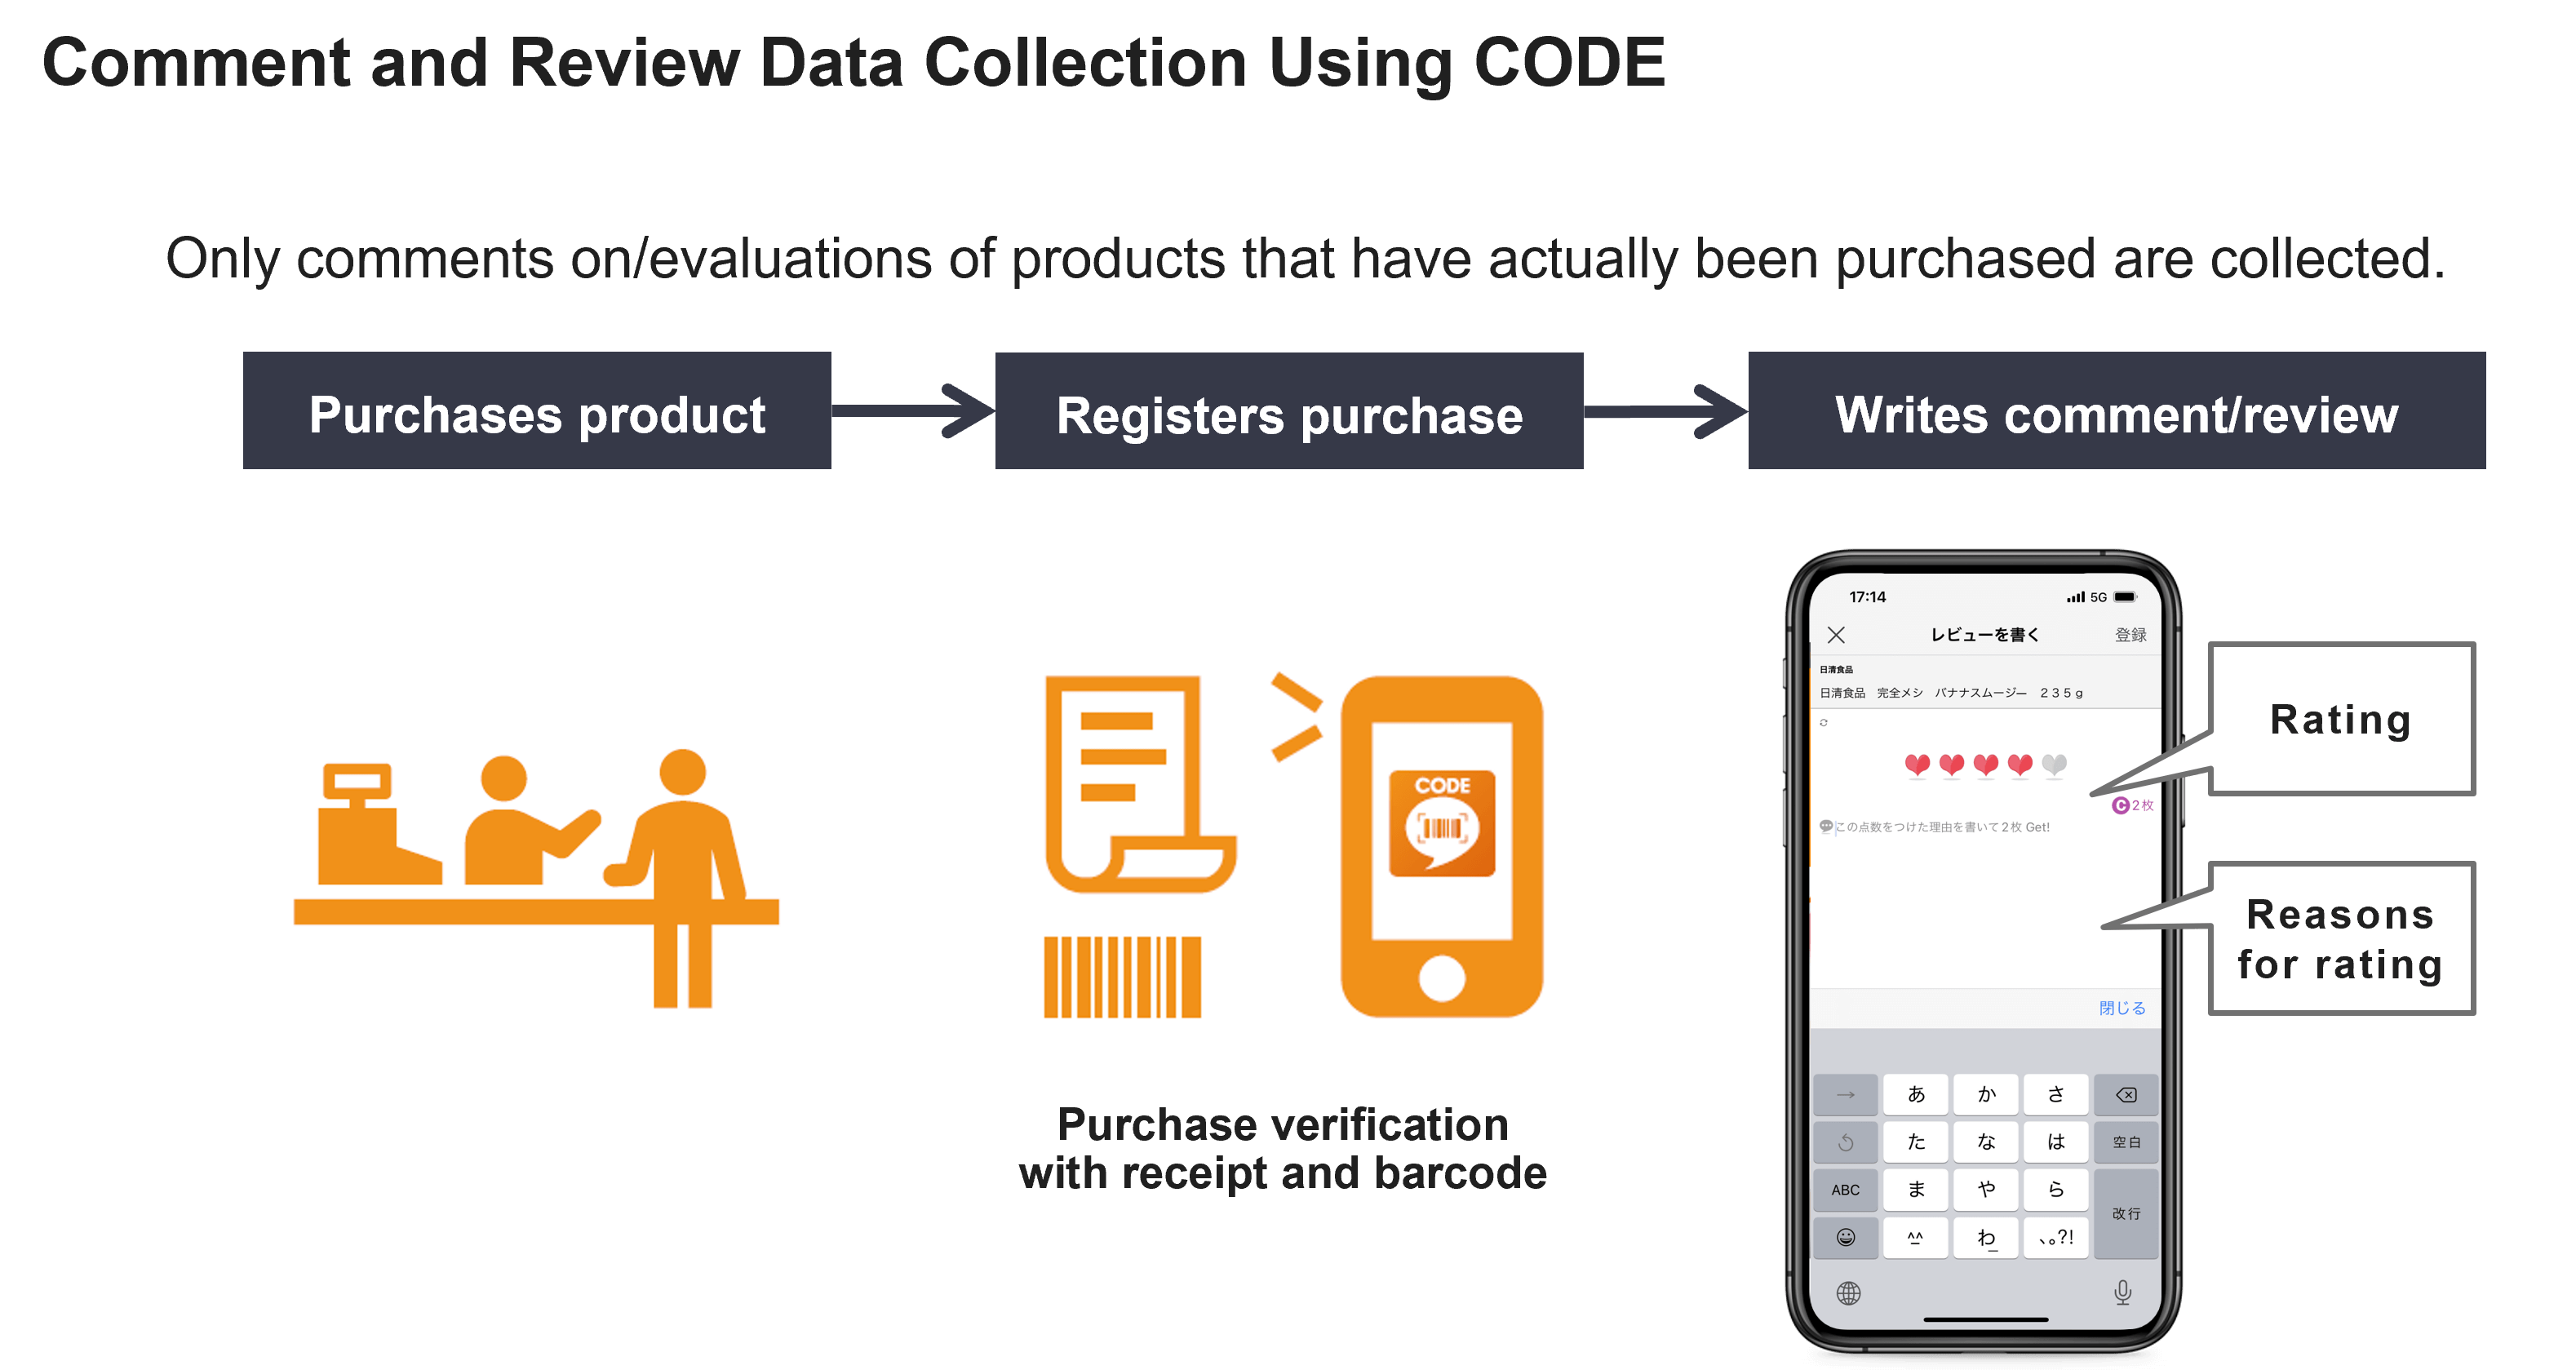 Comment and Review Data Collection Using CODE